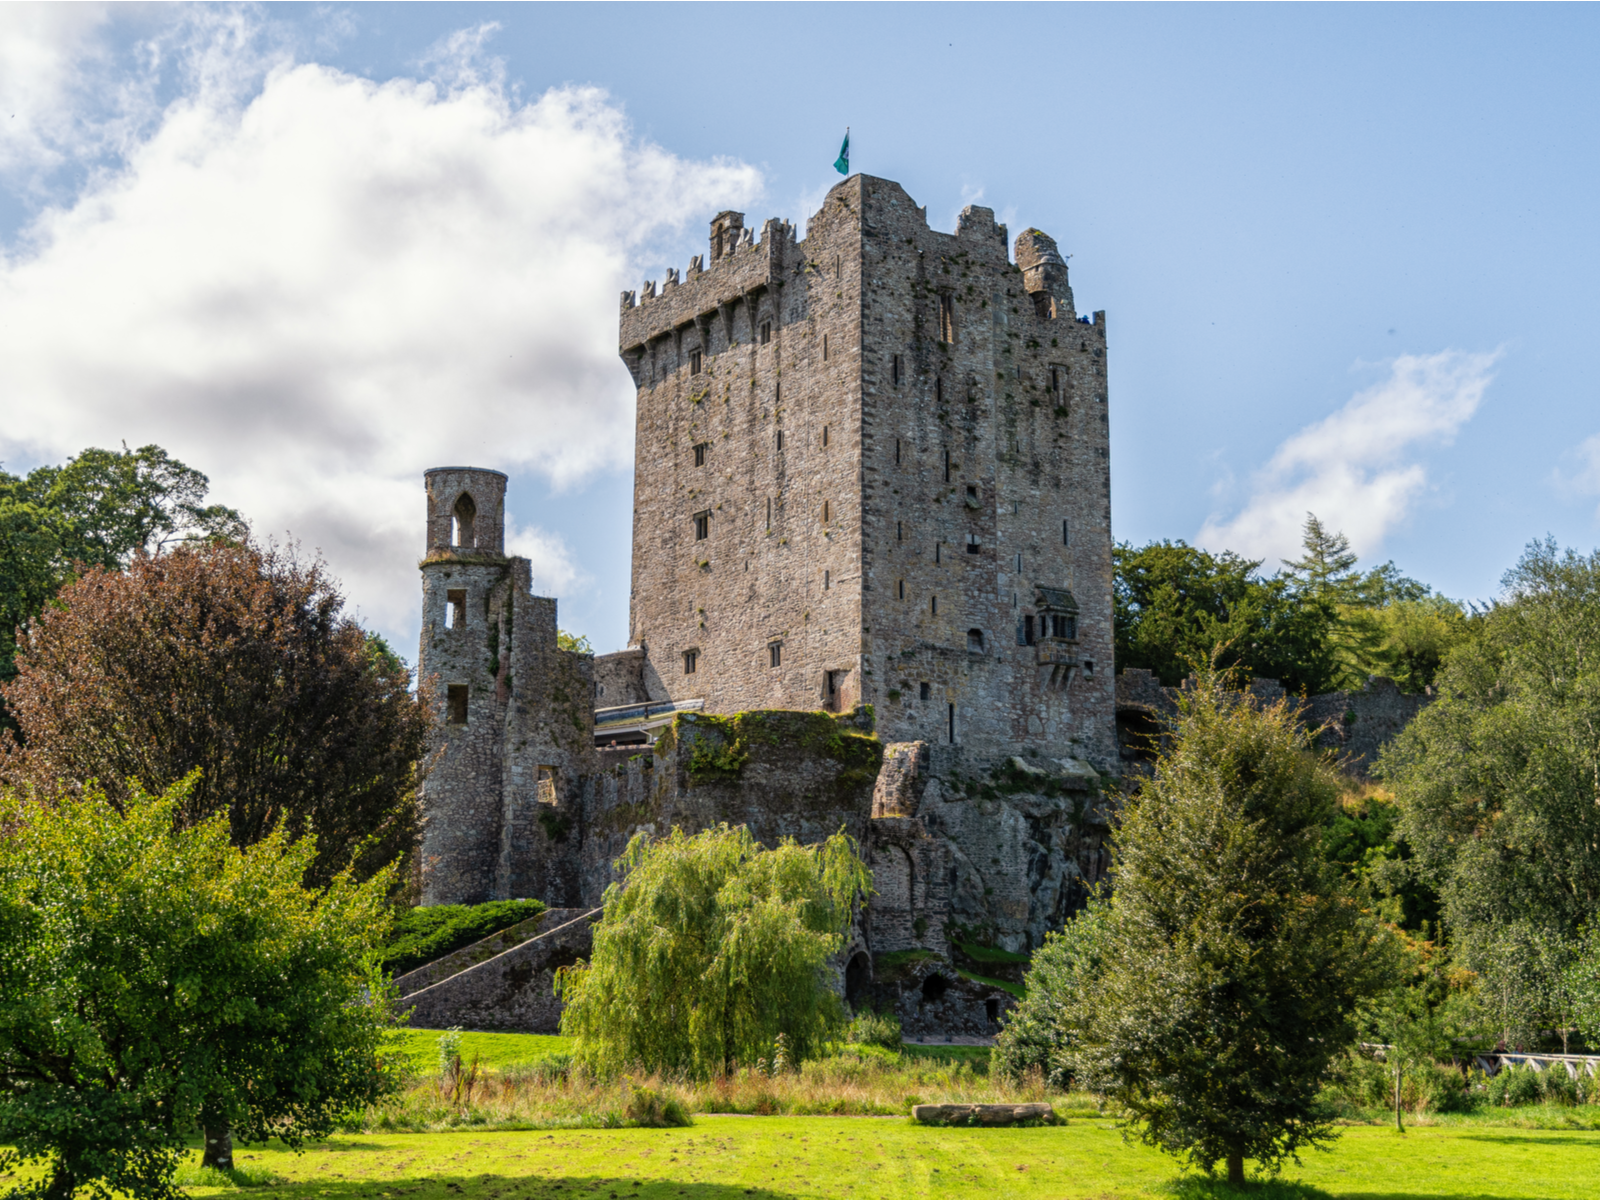 Ruins of a fortified tower at Blarney Castle, now one of the best places to visit in Ireland